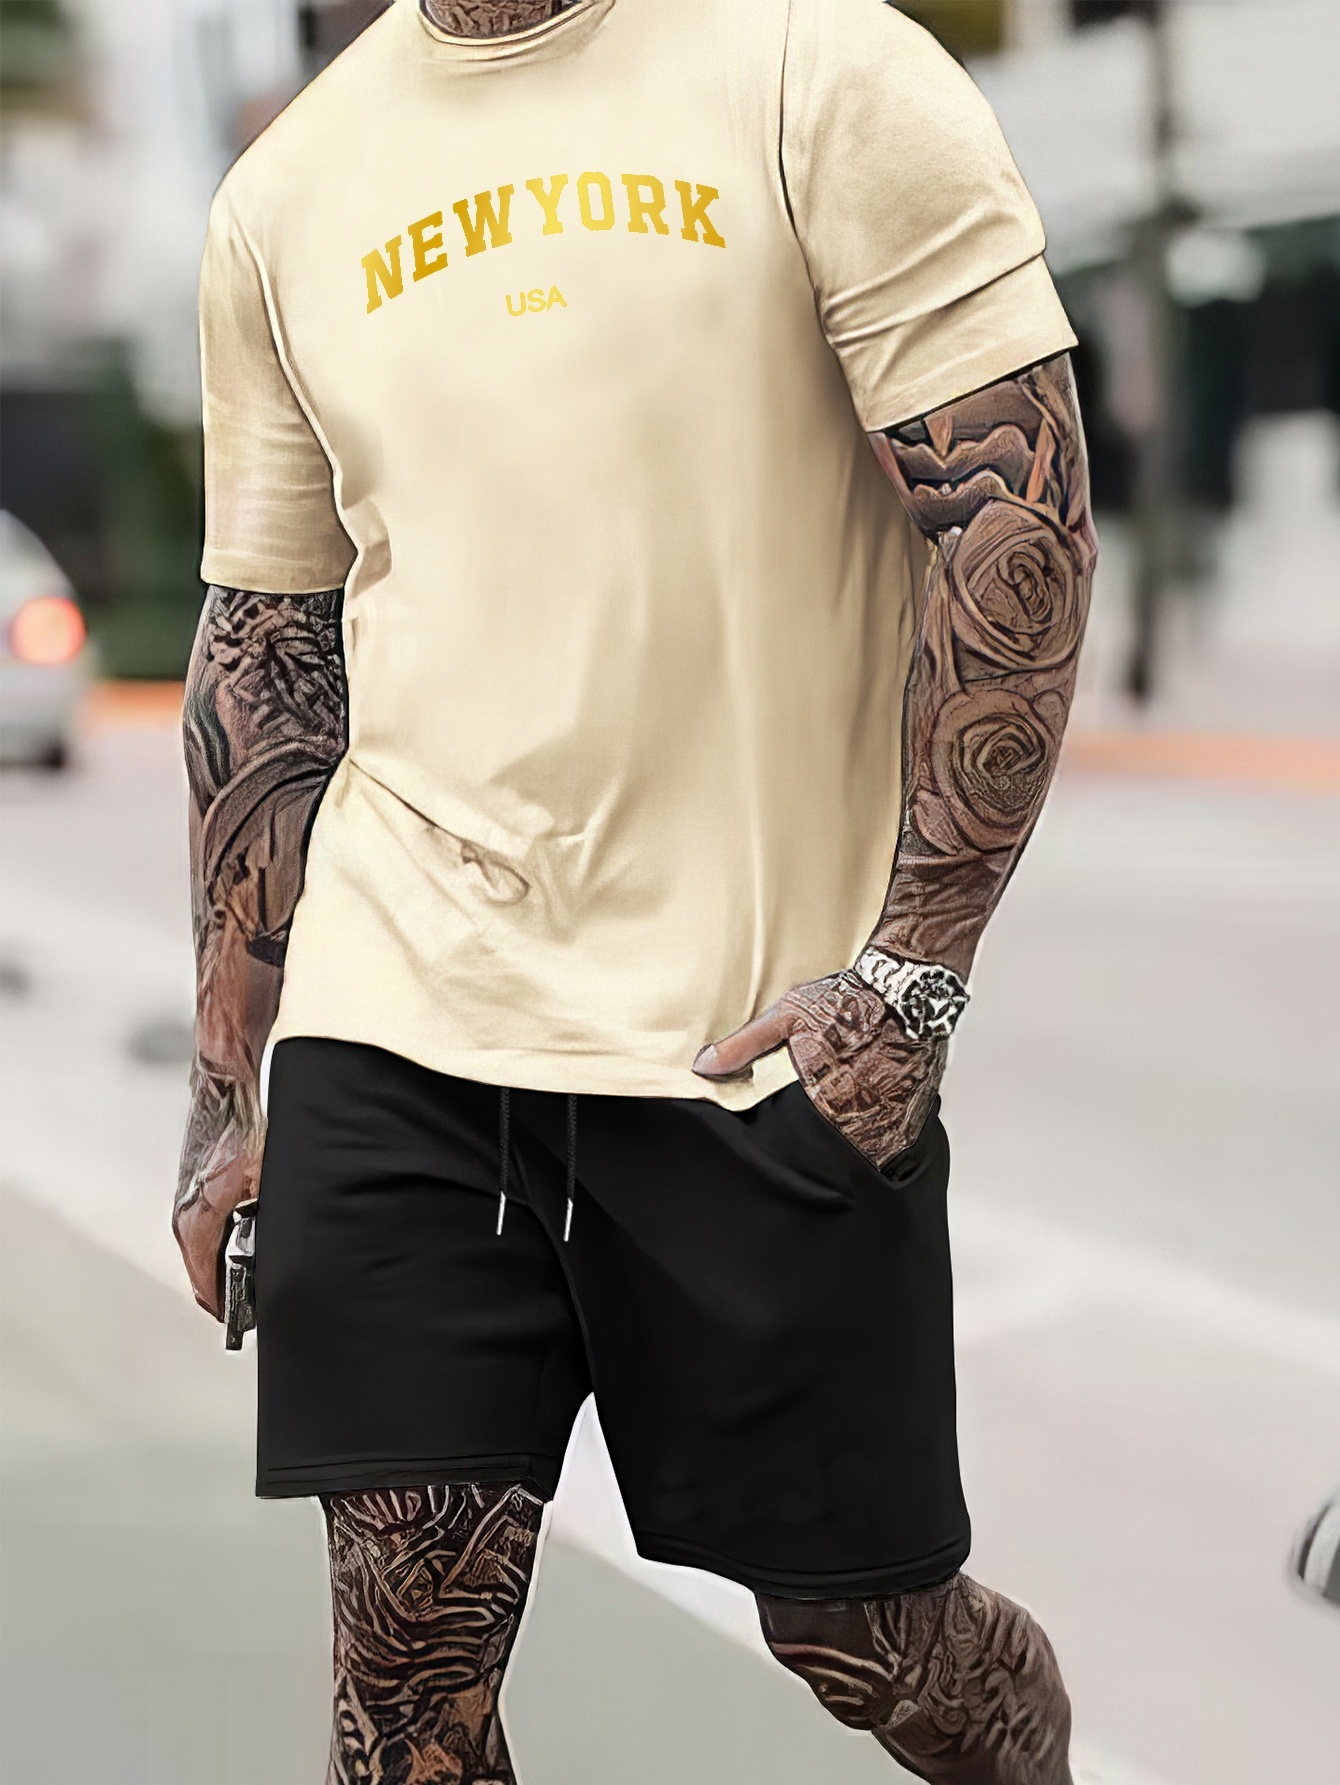 New York Print Street Style Mens 2pcs Outfits Trendy T Shirt And